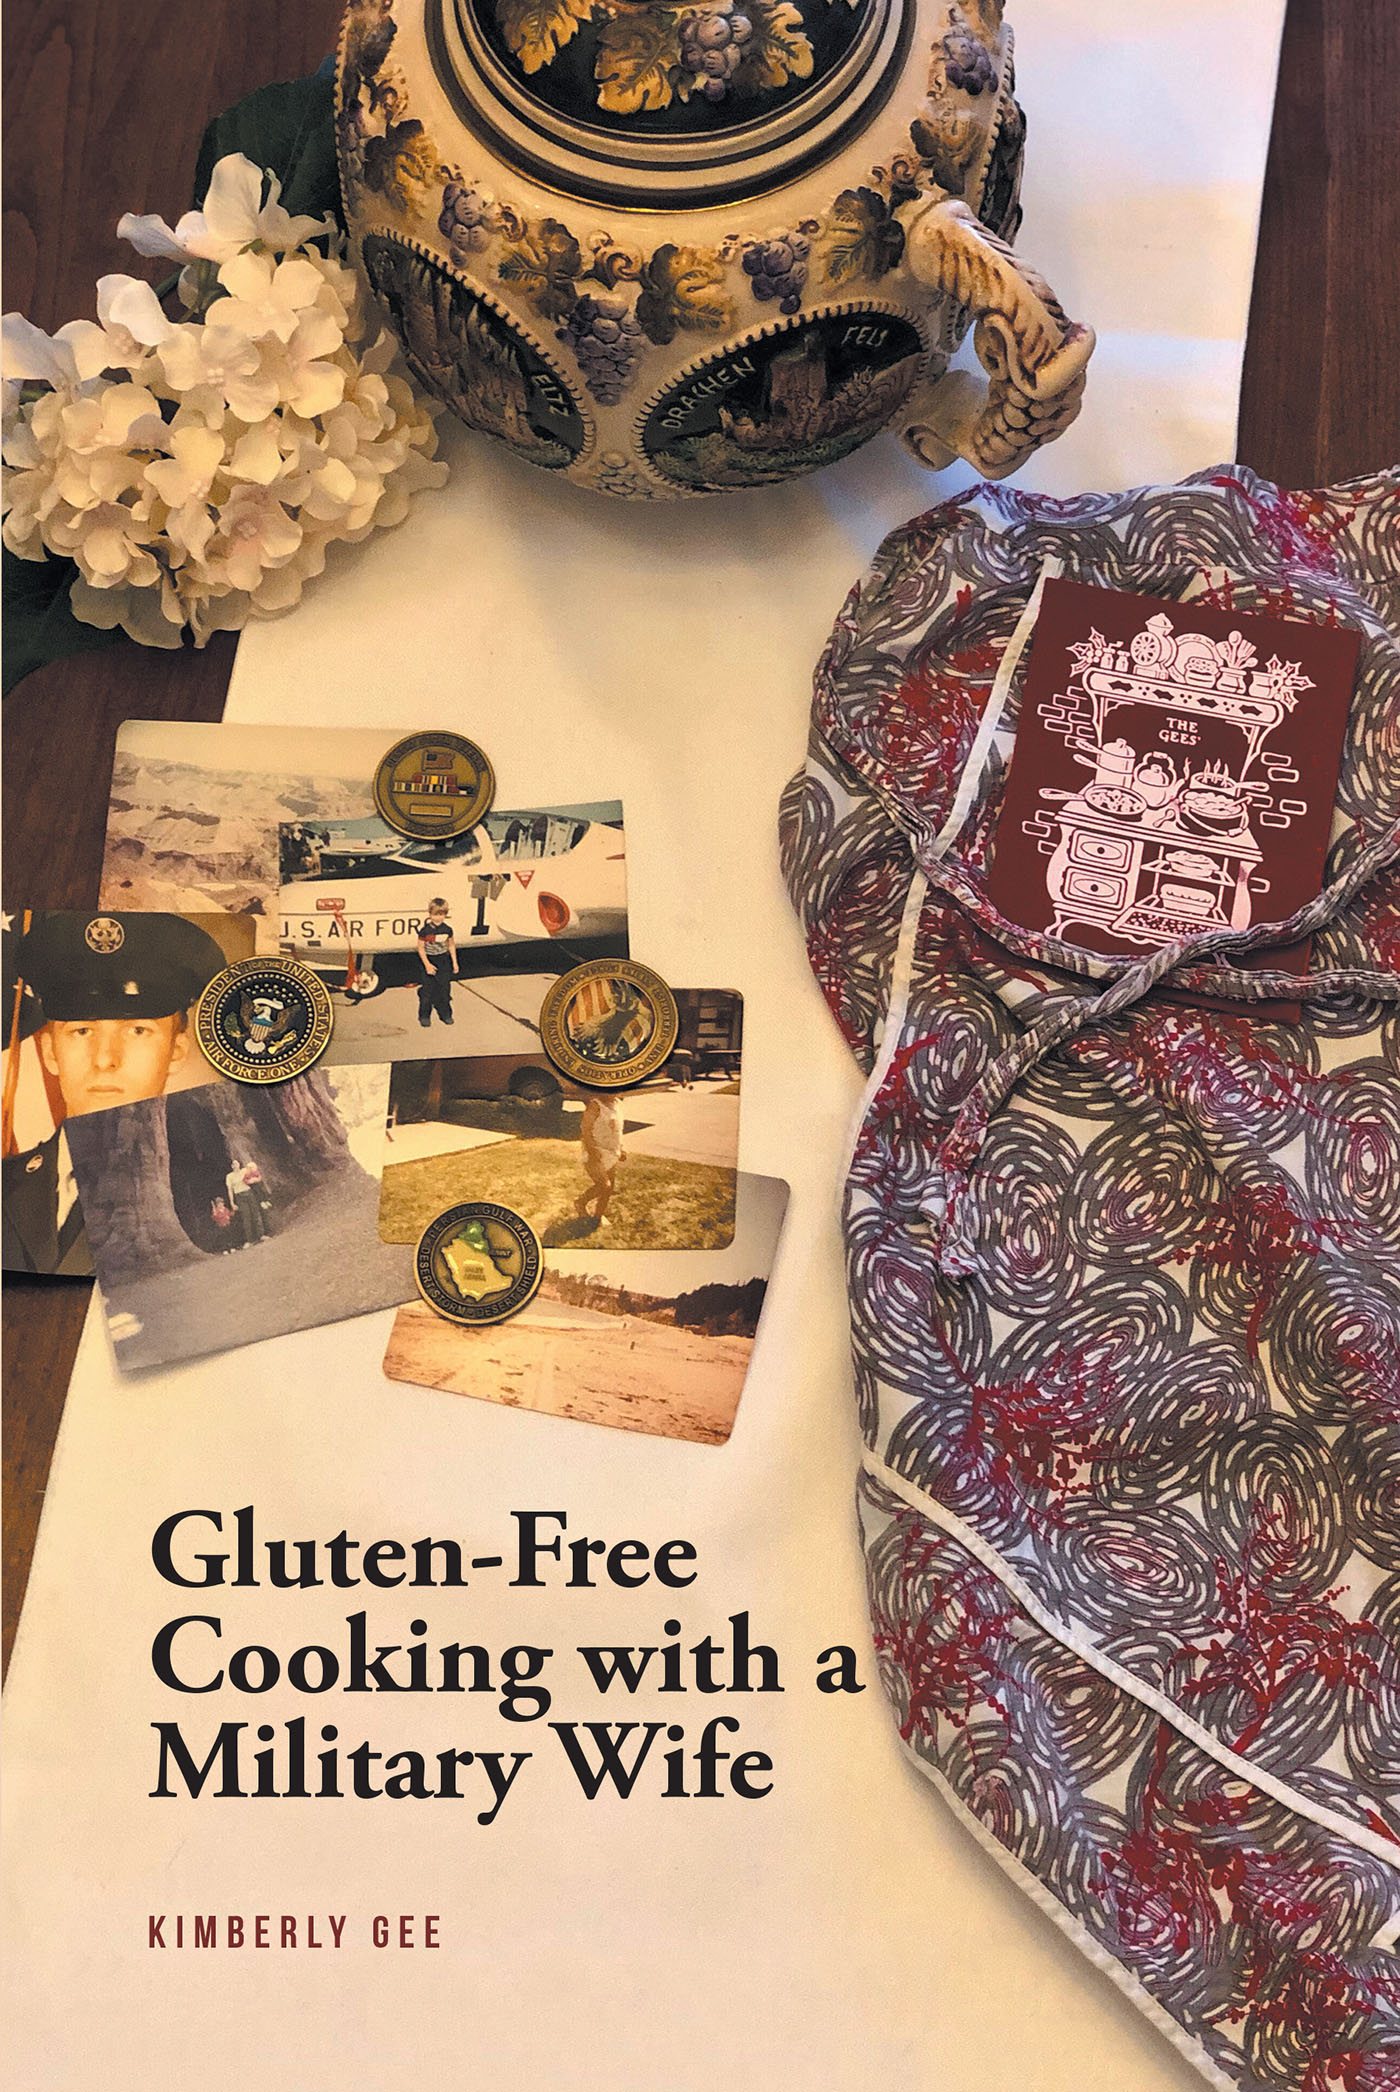 Author Kimberly Gee’s New Book, "Gluten-Free Cooking with a Military Wife," Provides Readers with Mouth-Watering Recipes to Classic Dishes and Favorite Comfort Foods